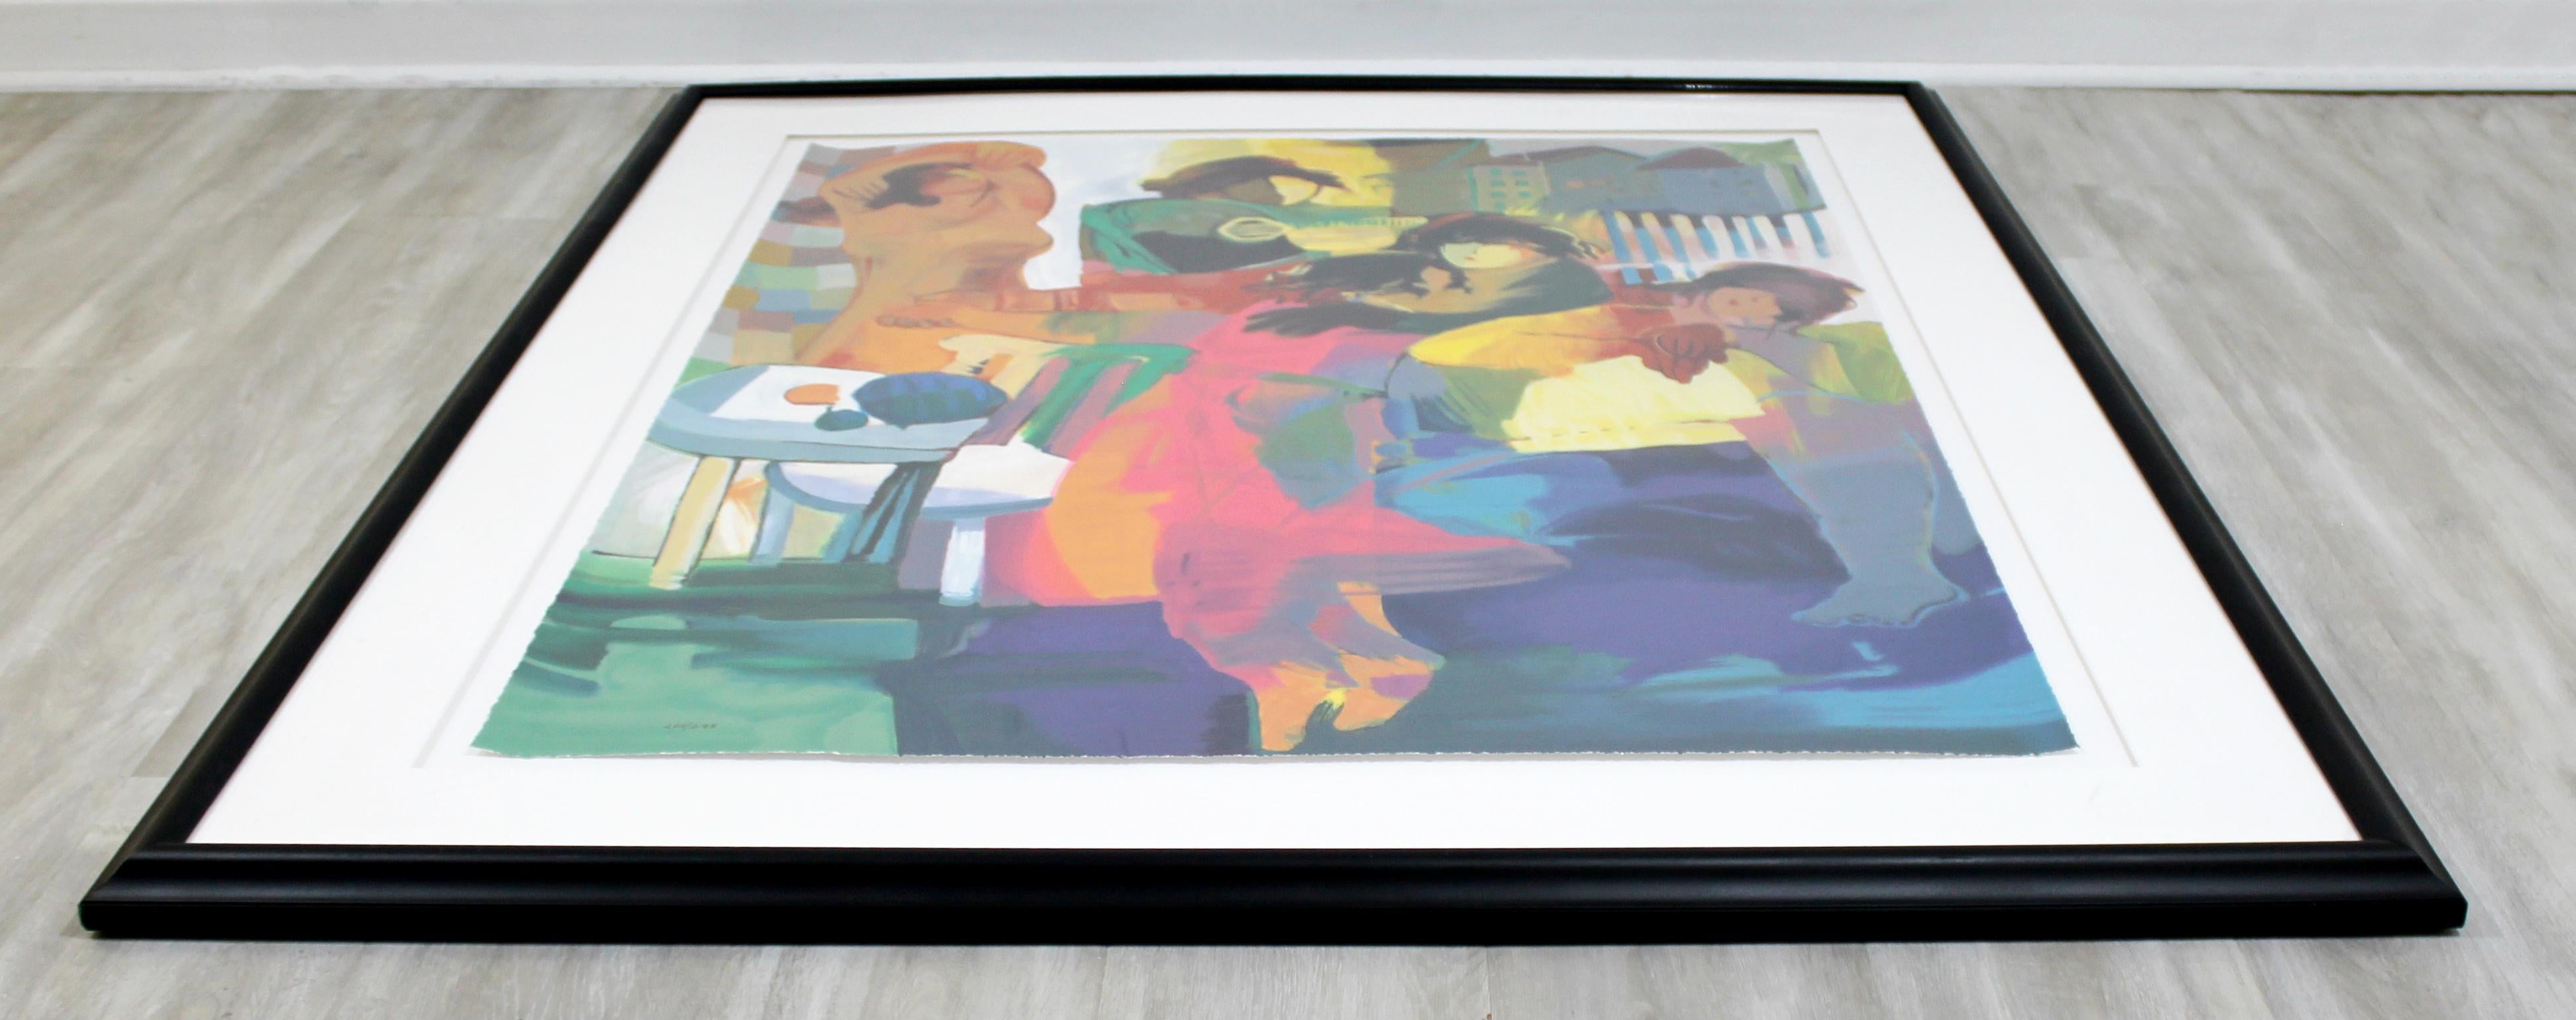 20th Century Contemporary Framed Lithograph by Hessam Abrishami Cherish the Day 200/295 For Sale